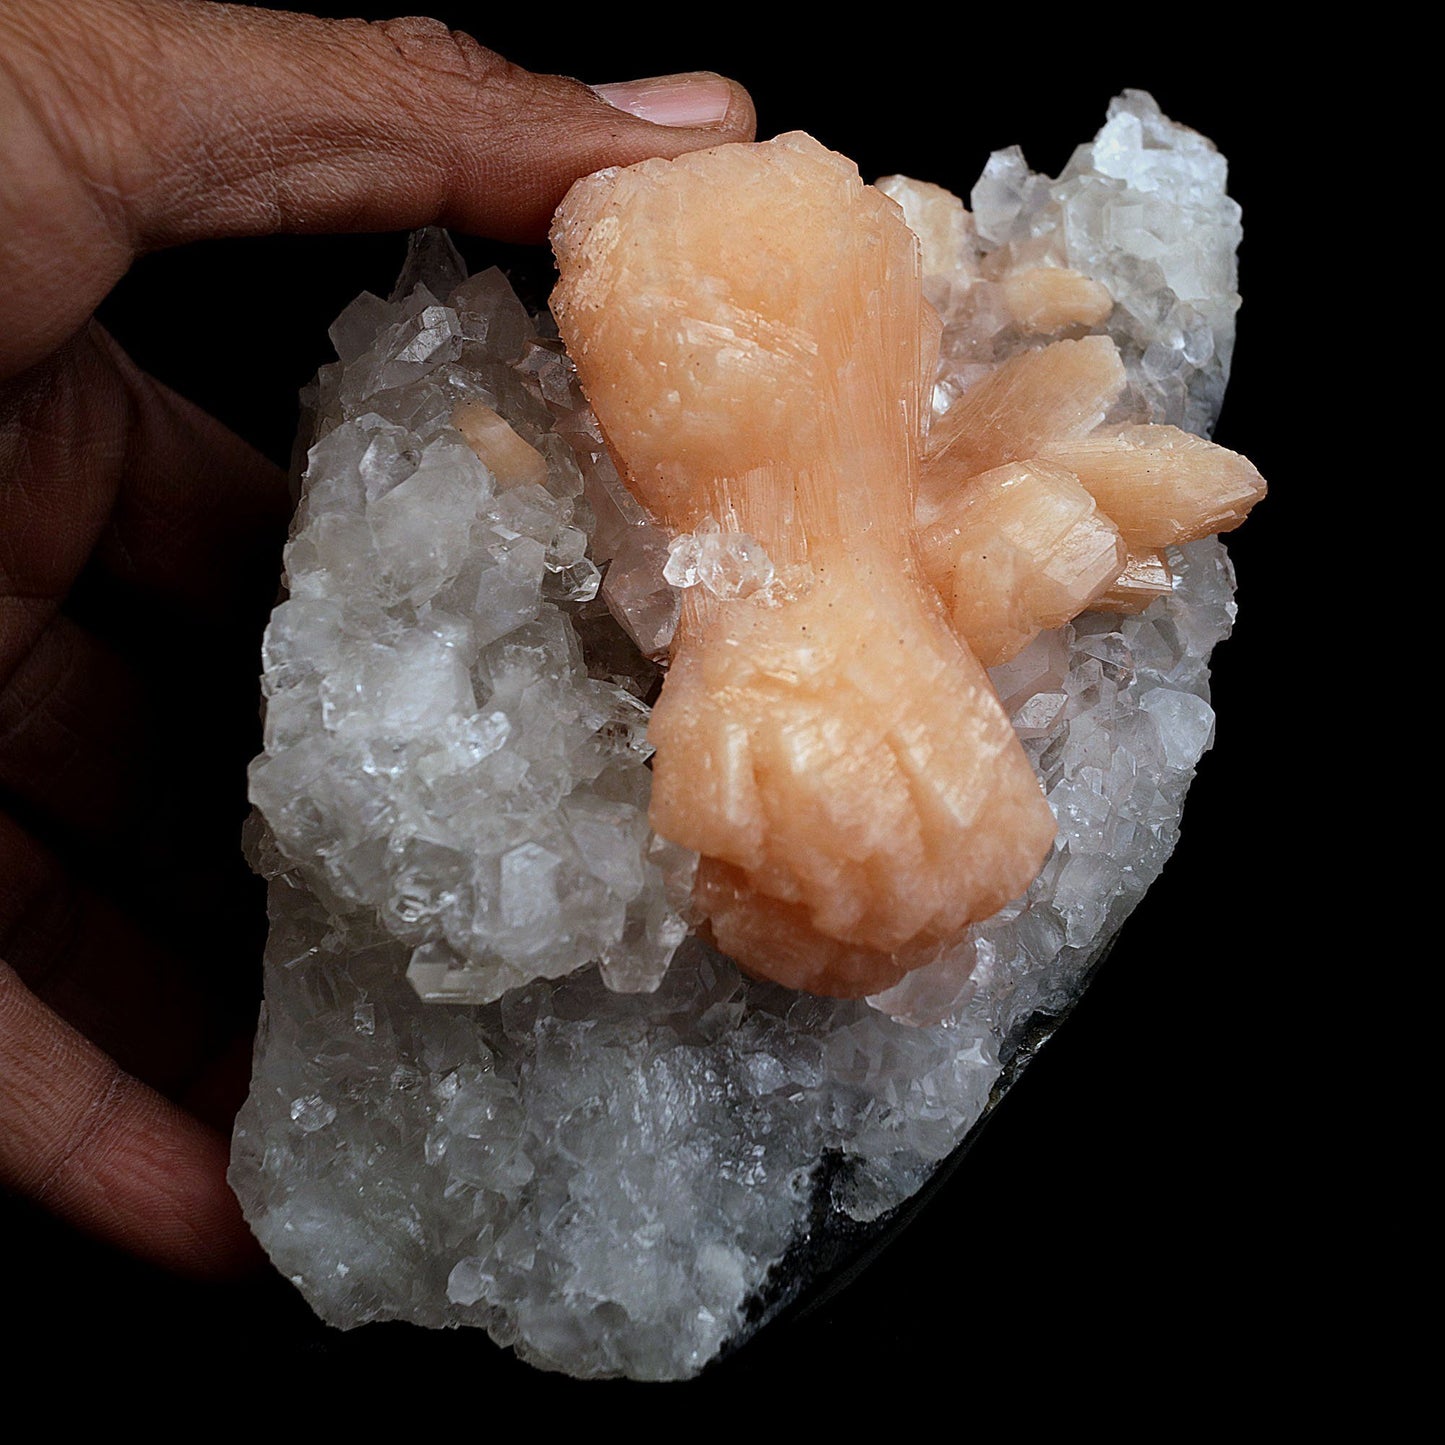 Stilbite Bow Shape on Gemmy Apophyllite Natural Mineral Specimen # B 4…  https://www.superbminerals.us/products/stilbite-bow-shape-on-gemmy-apophyllite-natural-mineral-specimen-b-4080  Features:Classic combination specimen from the basalt trap rock quarries of India featuring a Fluorapophyllite crystal cluster with a Stilbite bowtie! While common in general, this is really a special piece - more beautiful and sparkly than most. The Fluorapophyllite is glassy, transparent to translucent and composed